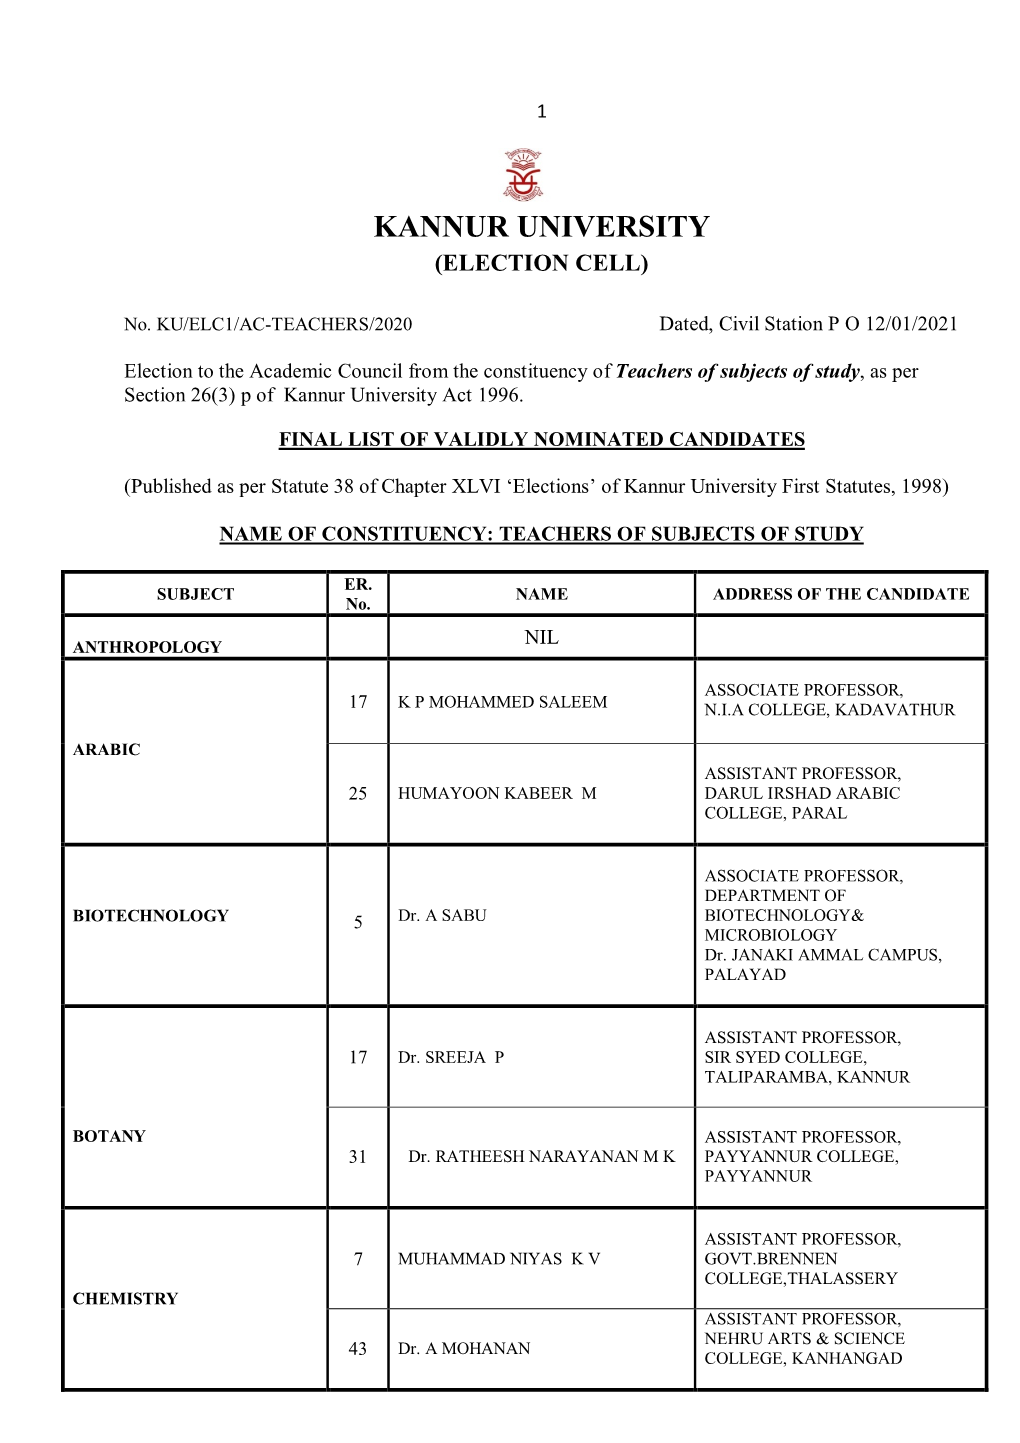 Teachers of Subjects of Study, As Per Section 26(3) P of Kannur University Act 1996